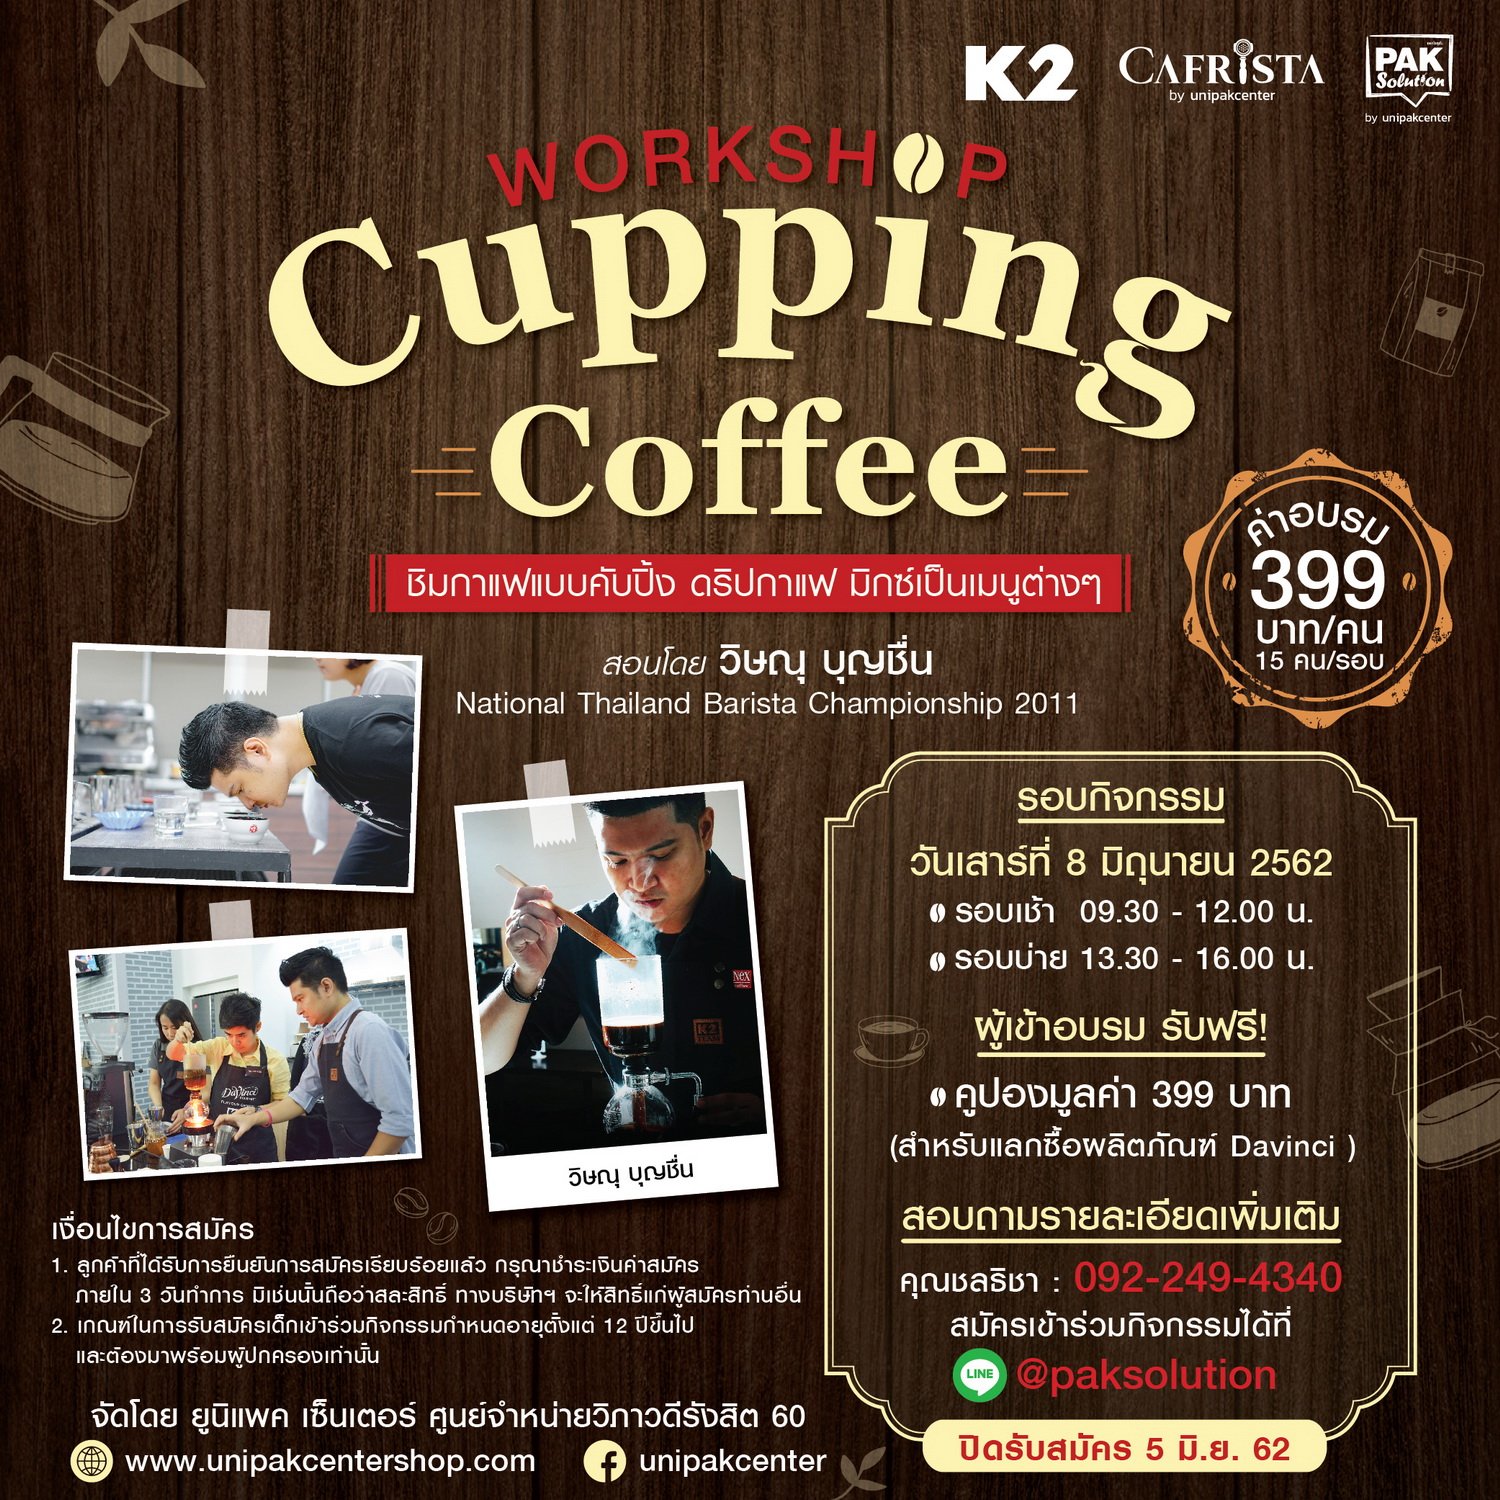 WORKSHOP  CUPPING COFFEE